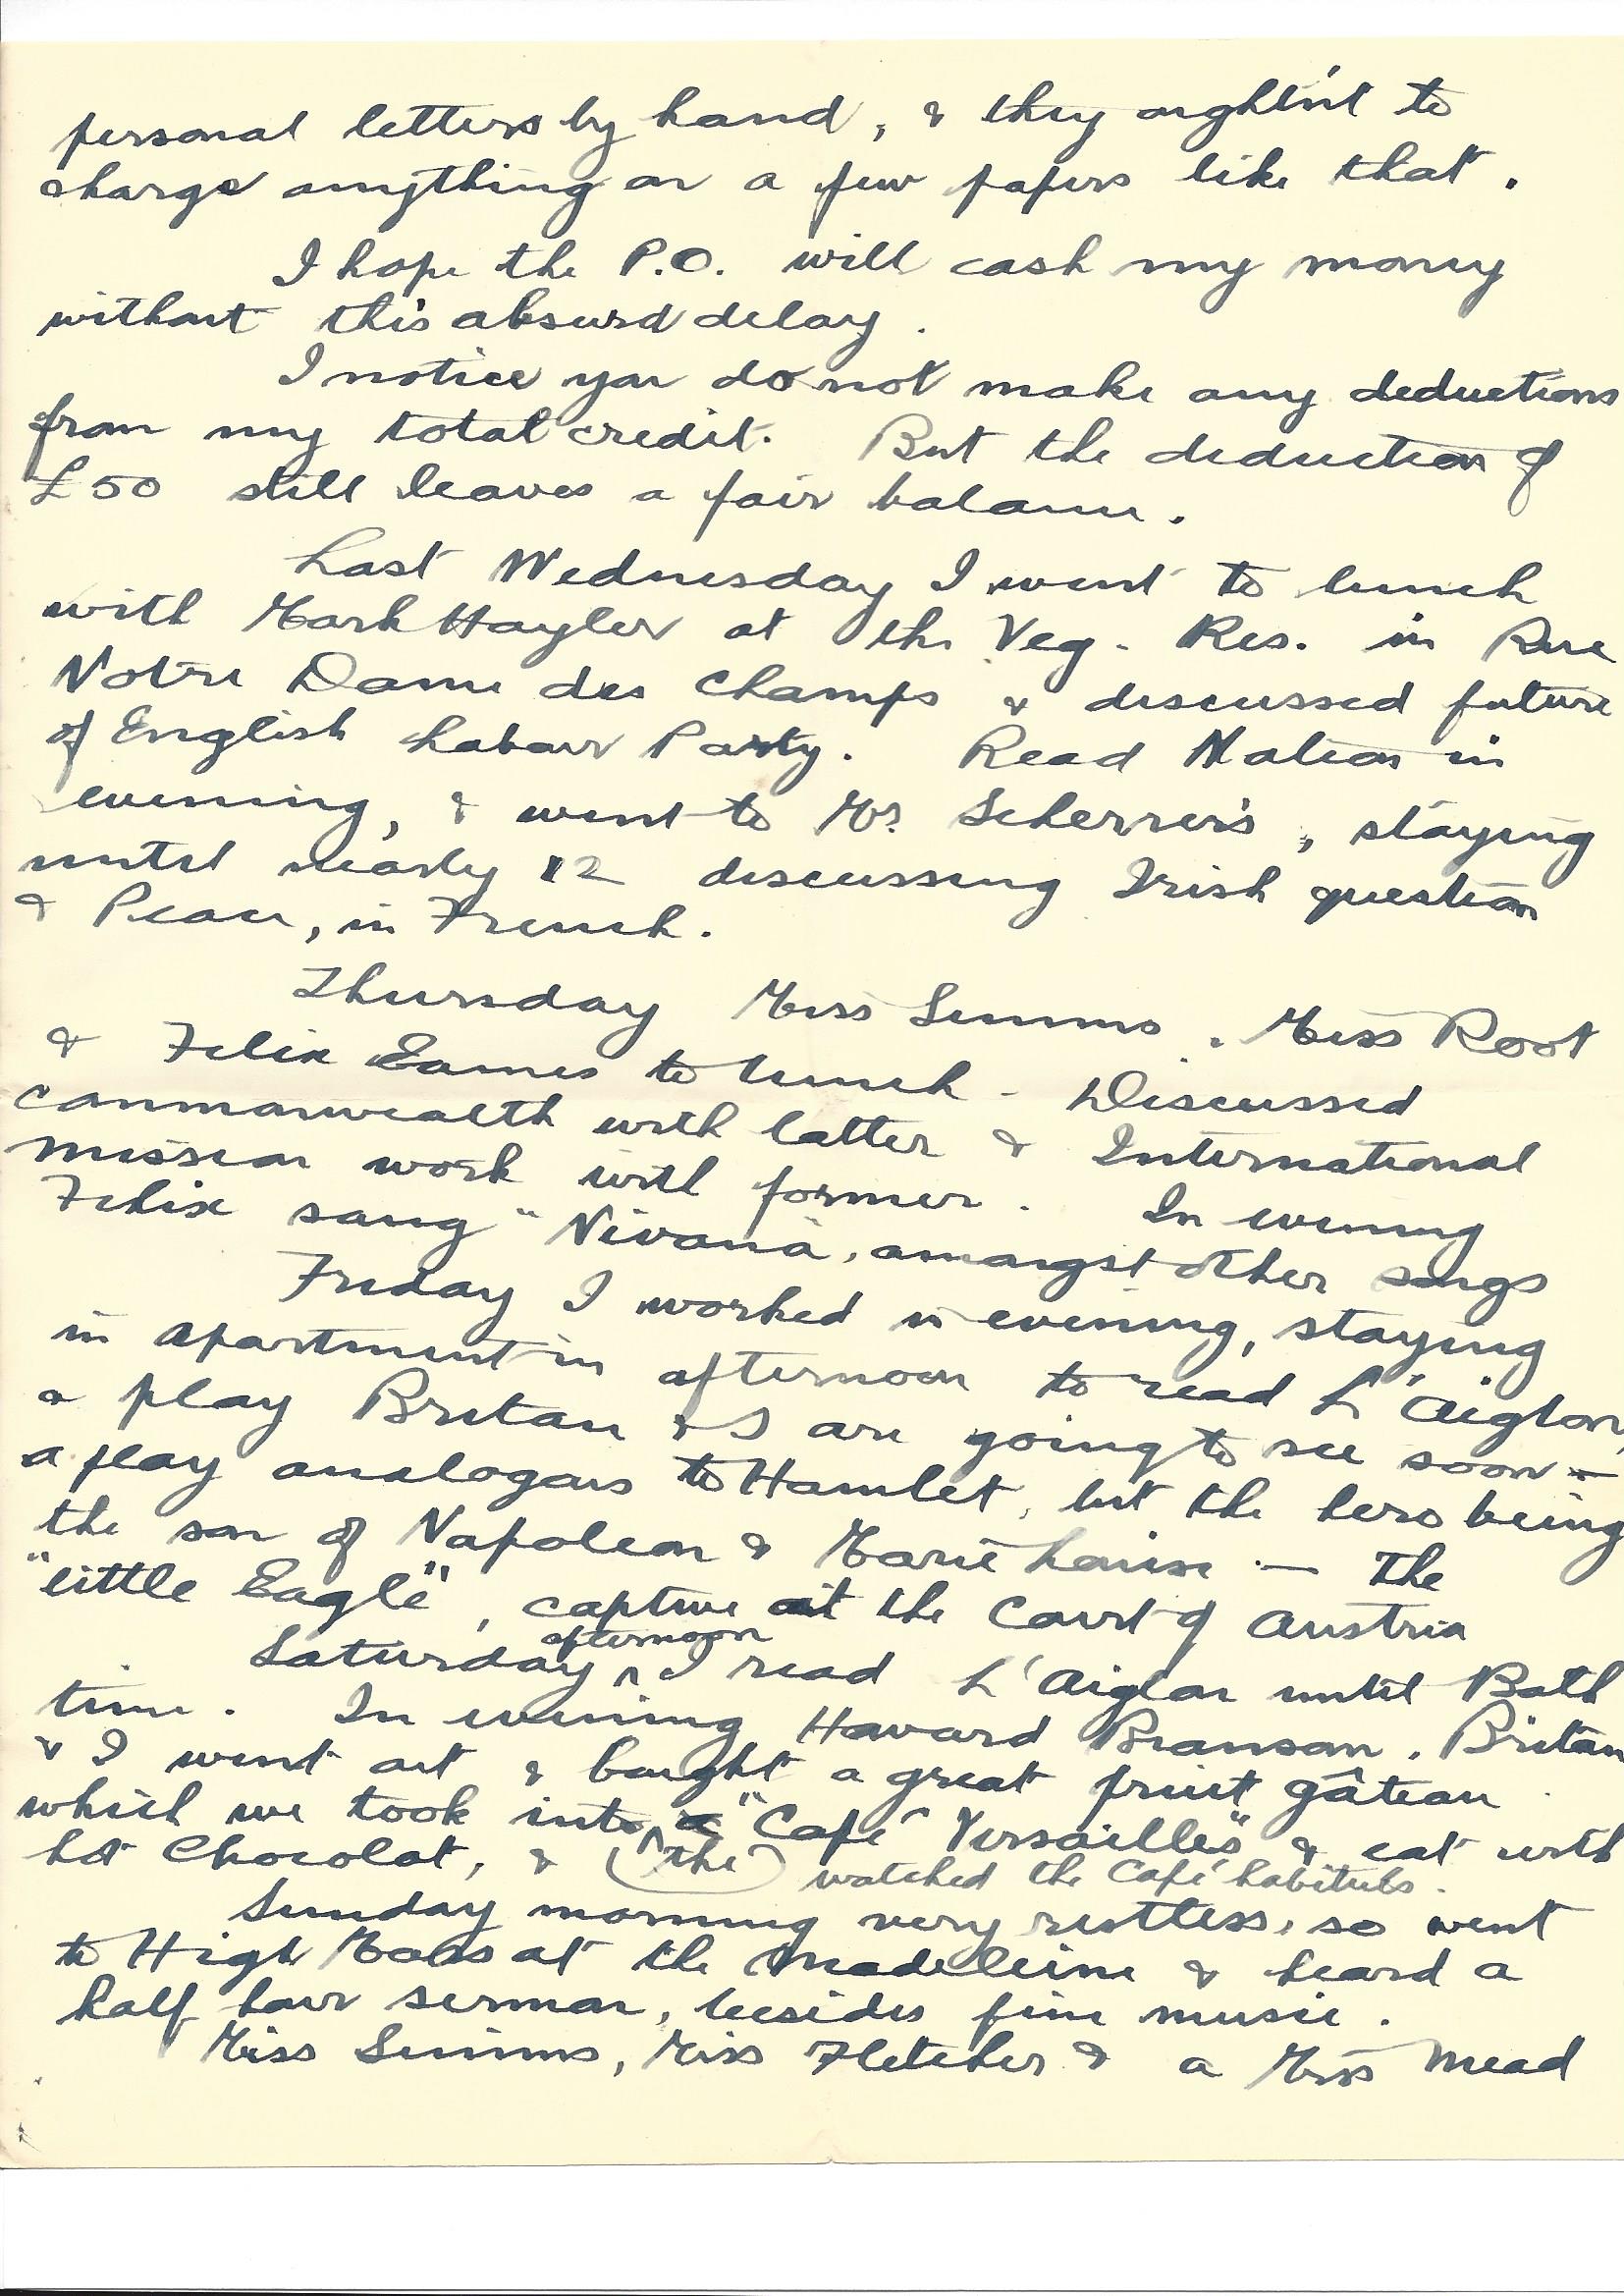 1920-01-11 page 3 letter by Donald Bearman